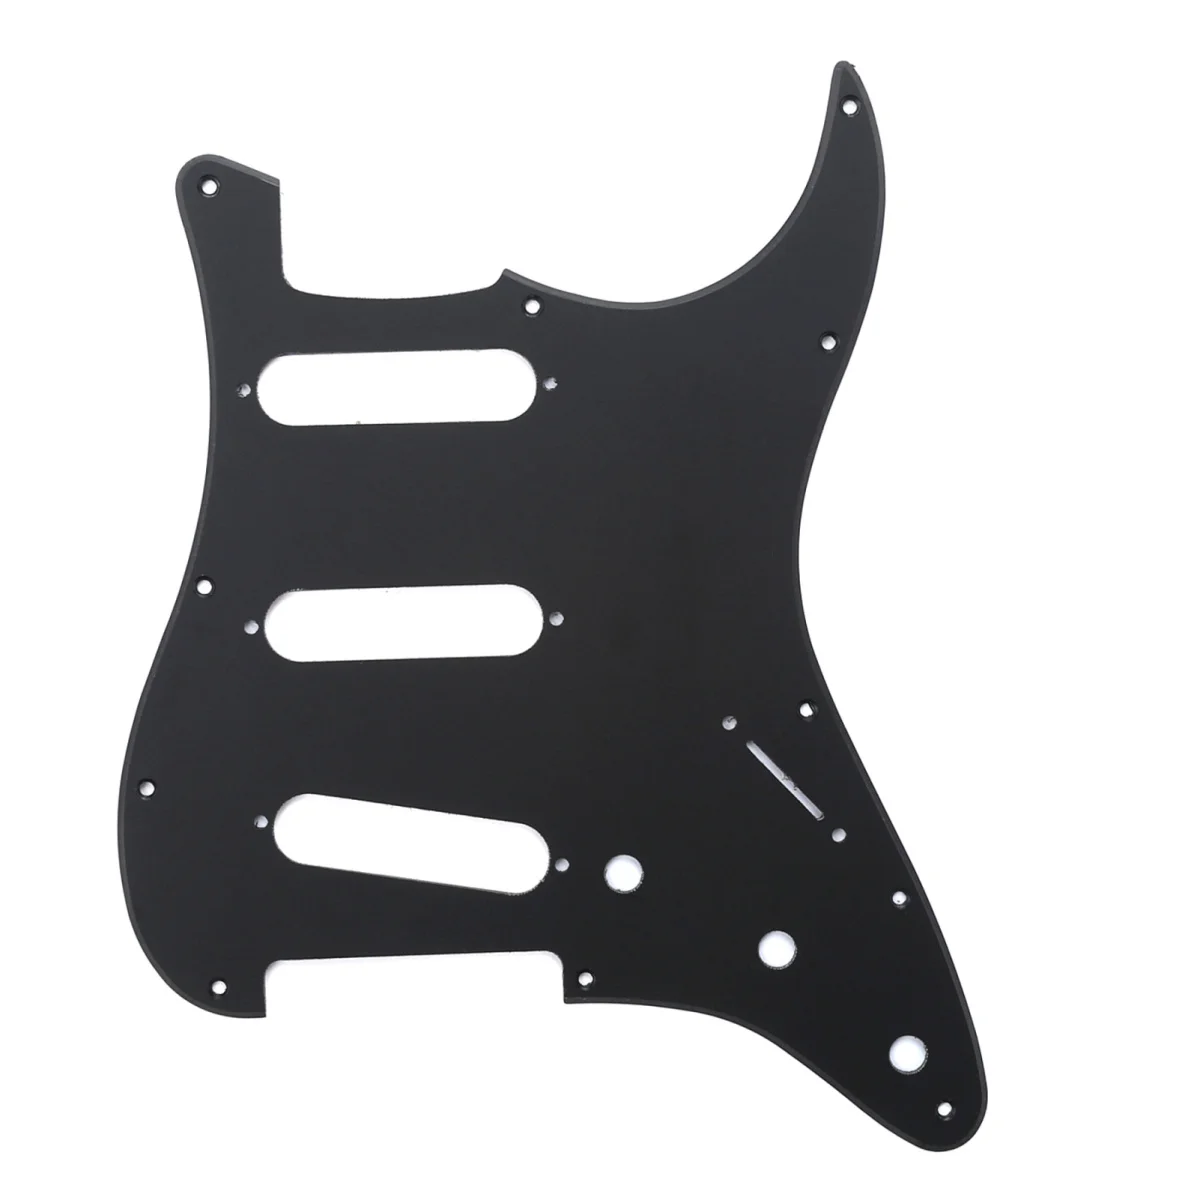 

Musiclily SSS 11 Hole Strat Guitar Pickguard for Fender USA/Mexican Made Standard Stratocaster Style, 1Ply Matte Black